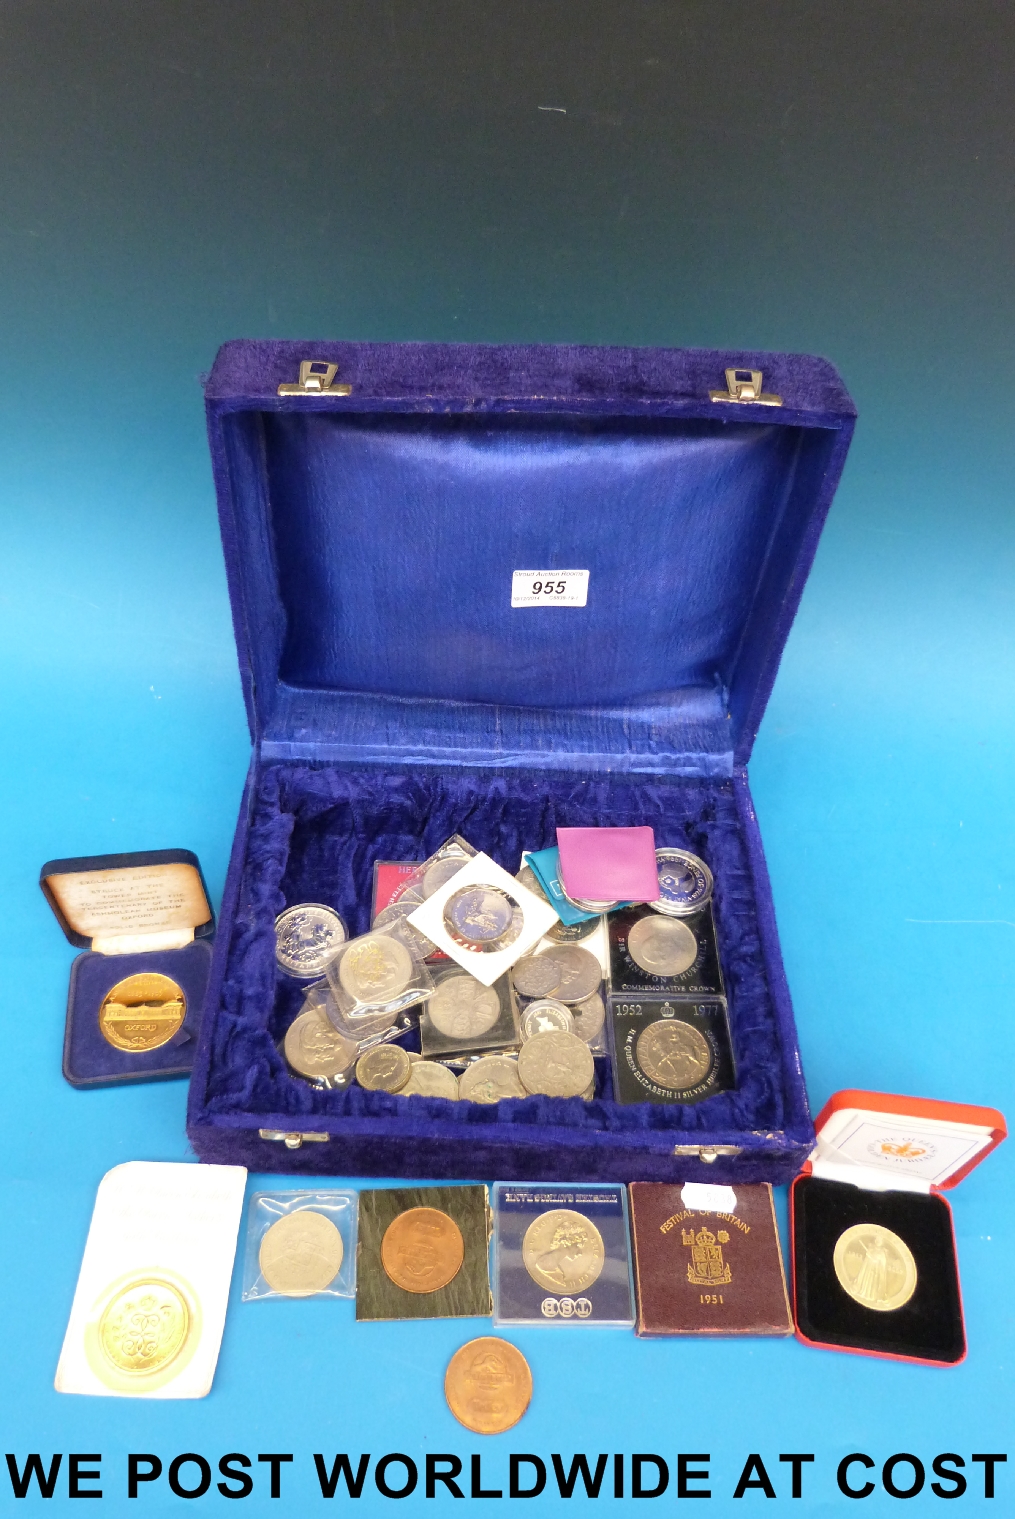 Cased 2002 Golden Jubilee Commemorative medal, 1951 crown, Ashmolean Museum bronze coin and case